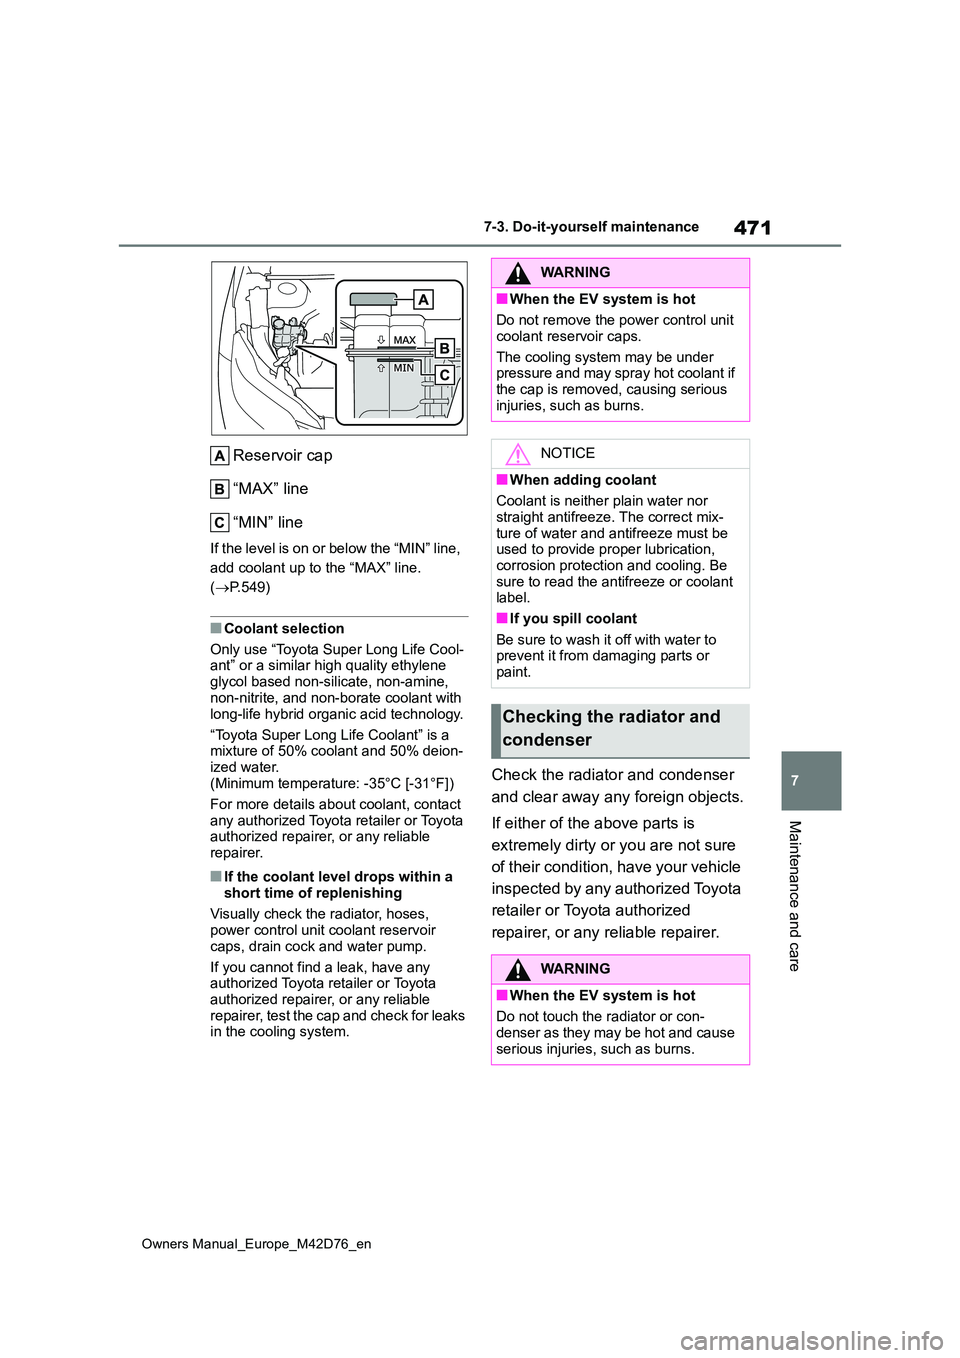 TOYOTA BZ4X 2022  Owners Manual (in English) 471
7
Owners Manual_Europe_M42D76_en
7-3. Do-it-yourself maintenance
Maintenance and care
Reservoir cap 
“MAX” line 
“MIN” line
If the level is on or below the “MIN” line,  
add coolant up